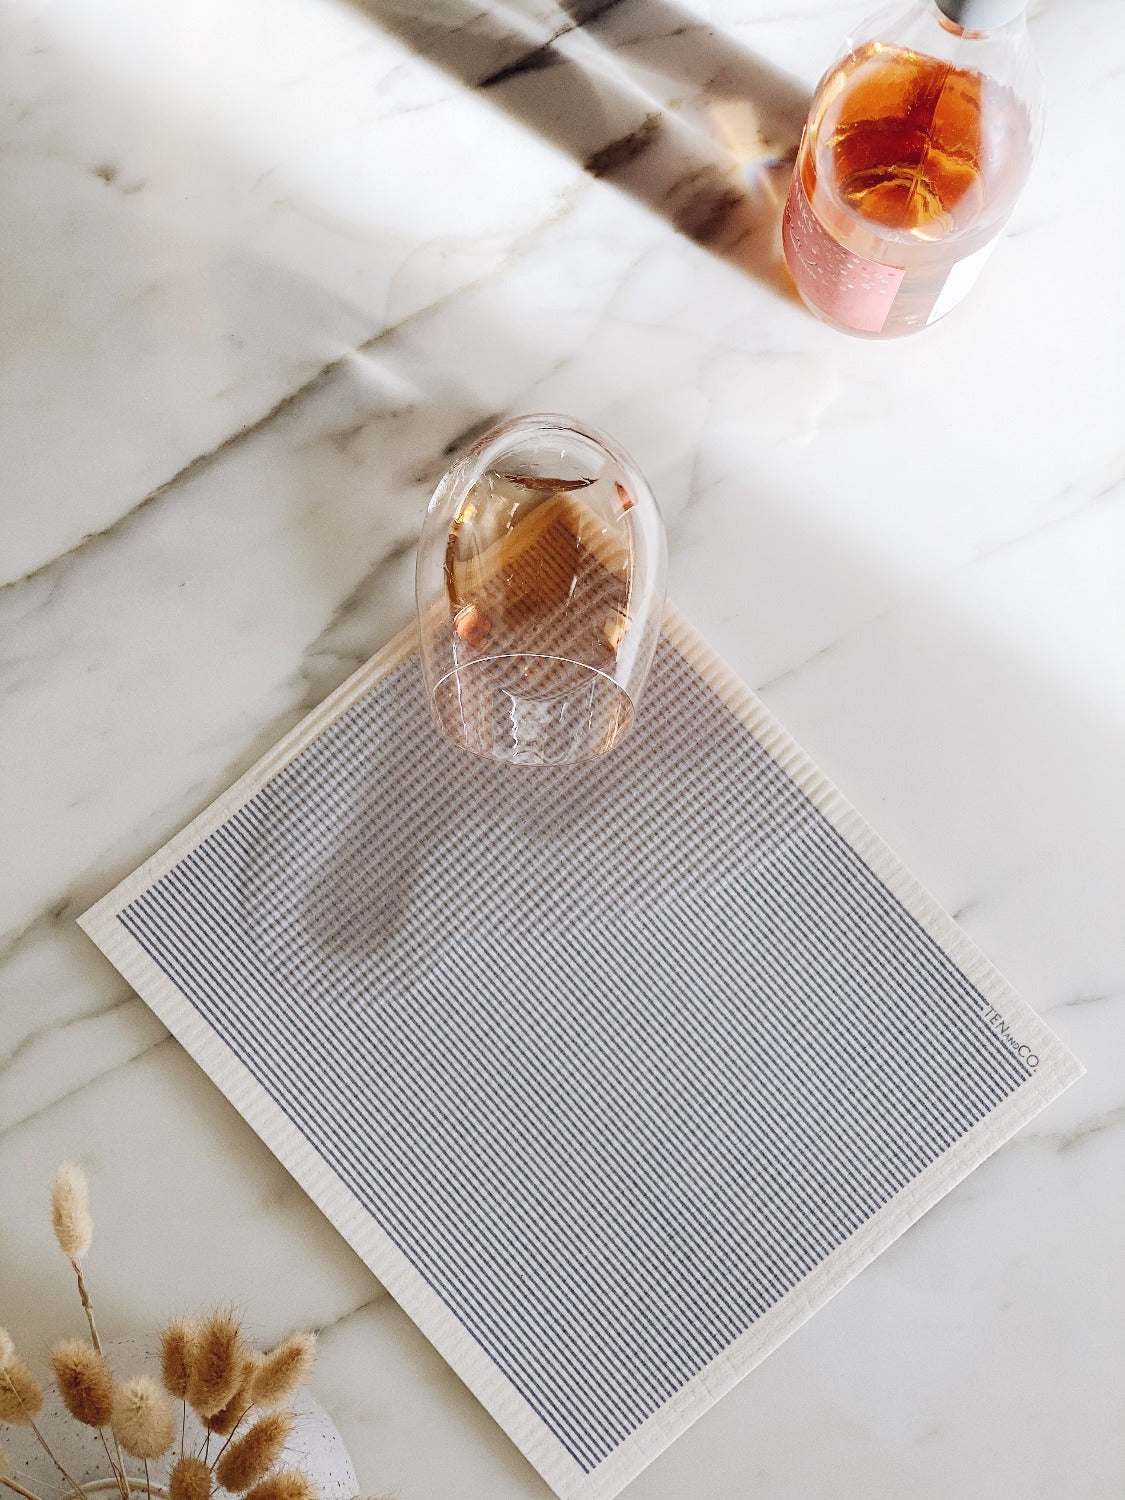 Product image of LARGE Stripe Denim Sponge Cloth mat. The Stripe Denim sponge cloth mat is on a white marble surface. There is a glass with wine that has spilt on the sponge cloth mat. There is a bottle of wine beside the mat. There are pussy willows in the bottom left corner. 